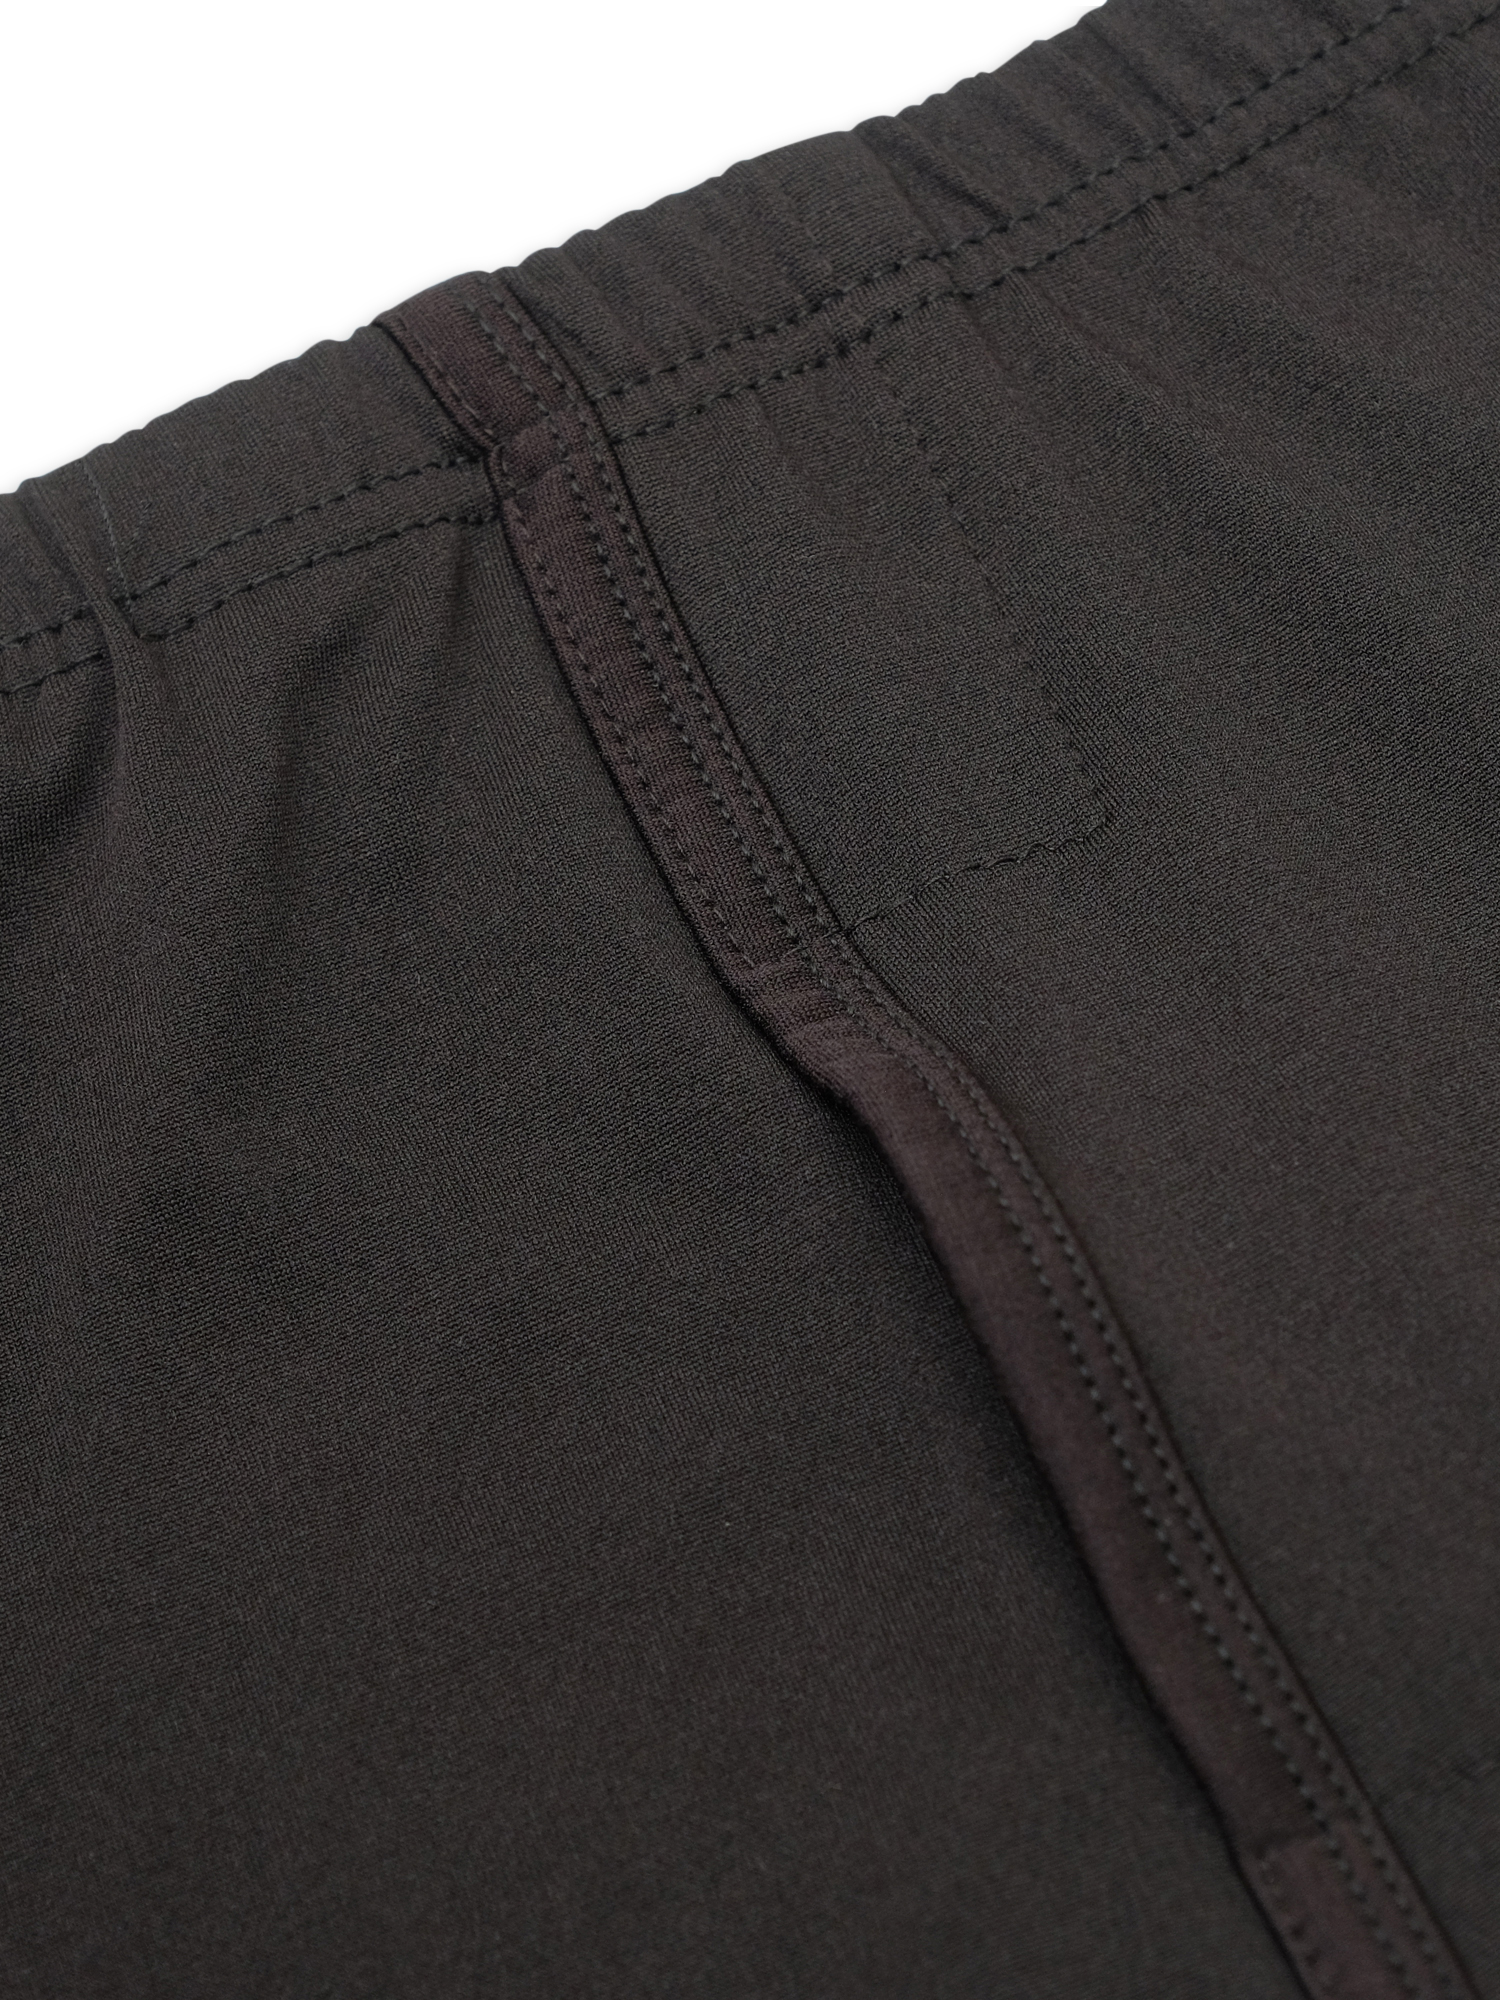 Real Essentials Boys Thermal Bottoms, 3 Pack Fleece Lined Thermal Pants Sizes S (6-7) - XL (16-18) - image 3 of 5